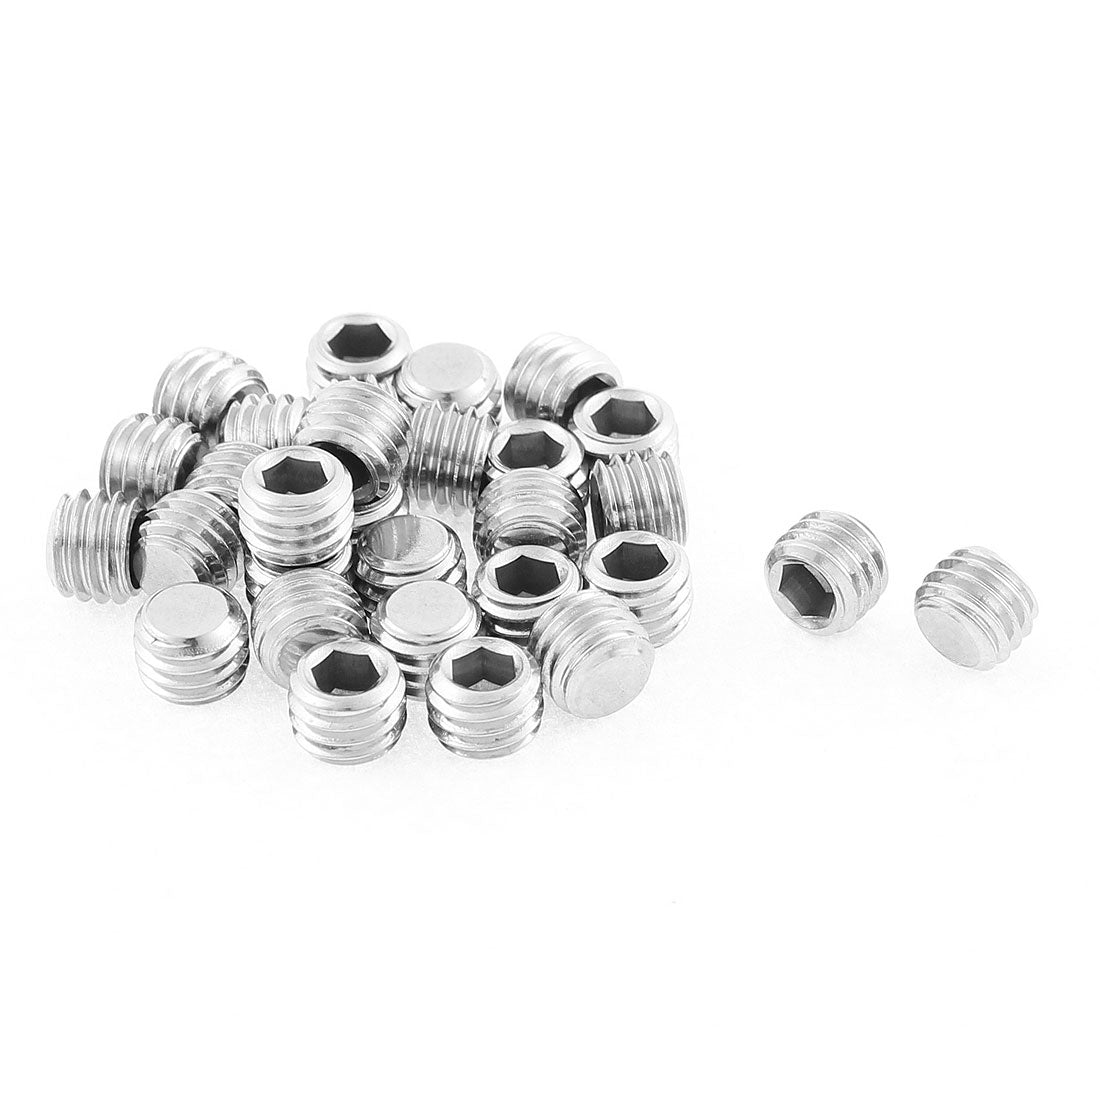 uxcell Uxcell M8x6mm 1.25mm Pitch Stainless Steel Hex Socket Set Flat Point Grub Screws 30pcs